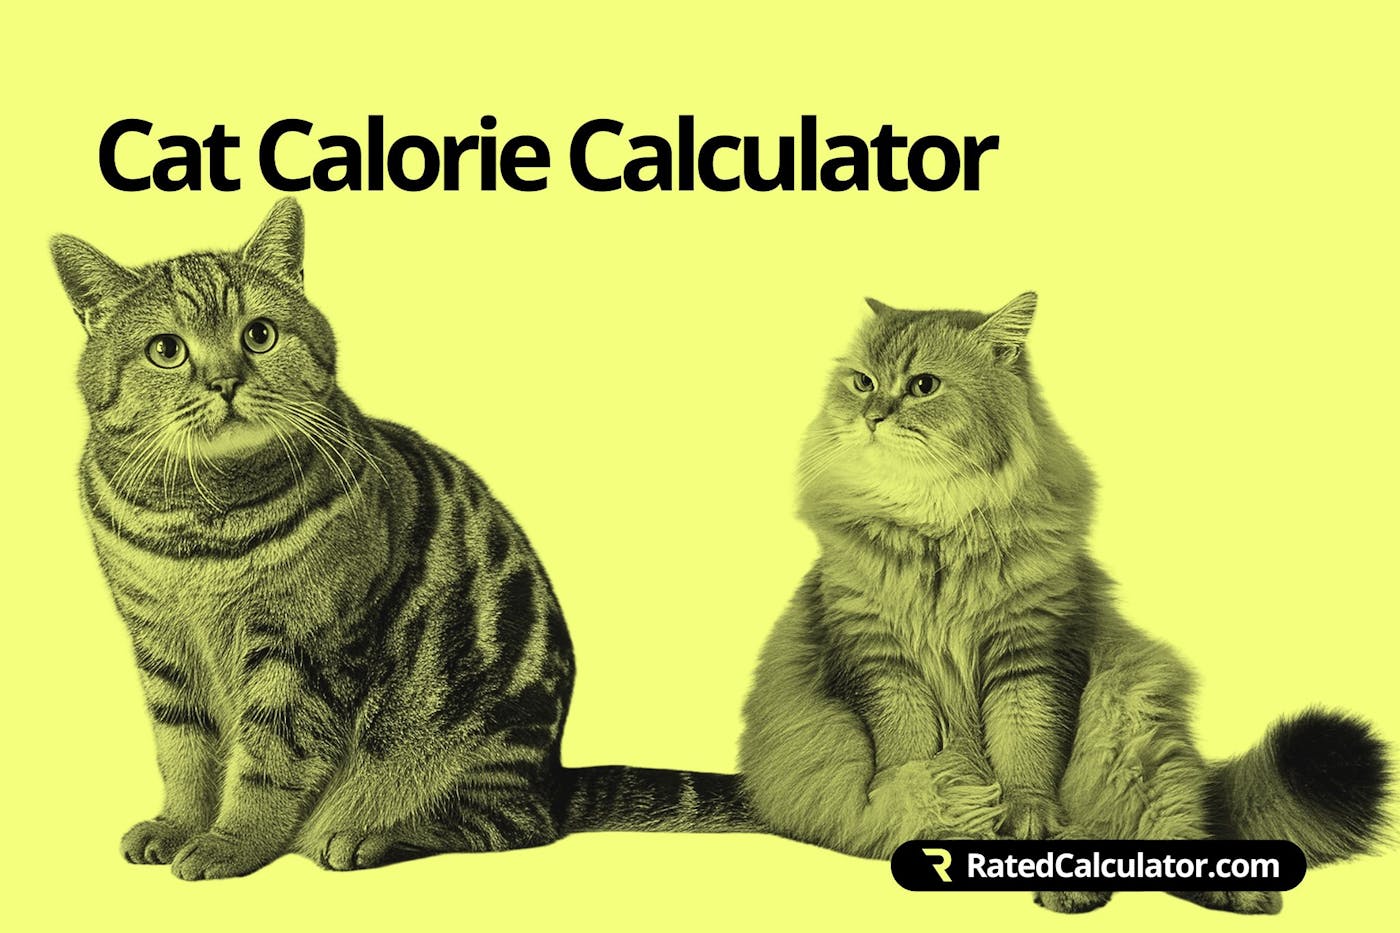 How to use the Cat Calorie Calculator